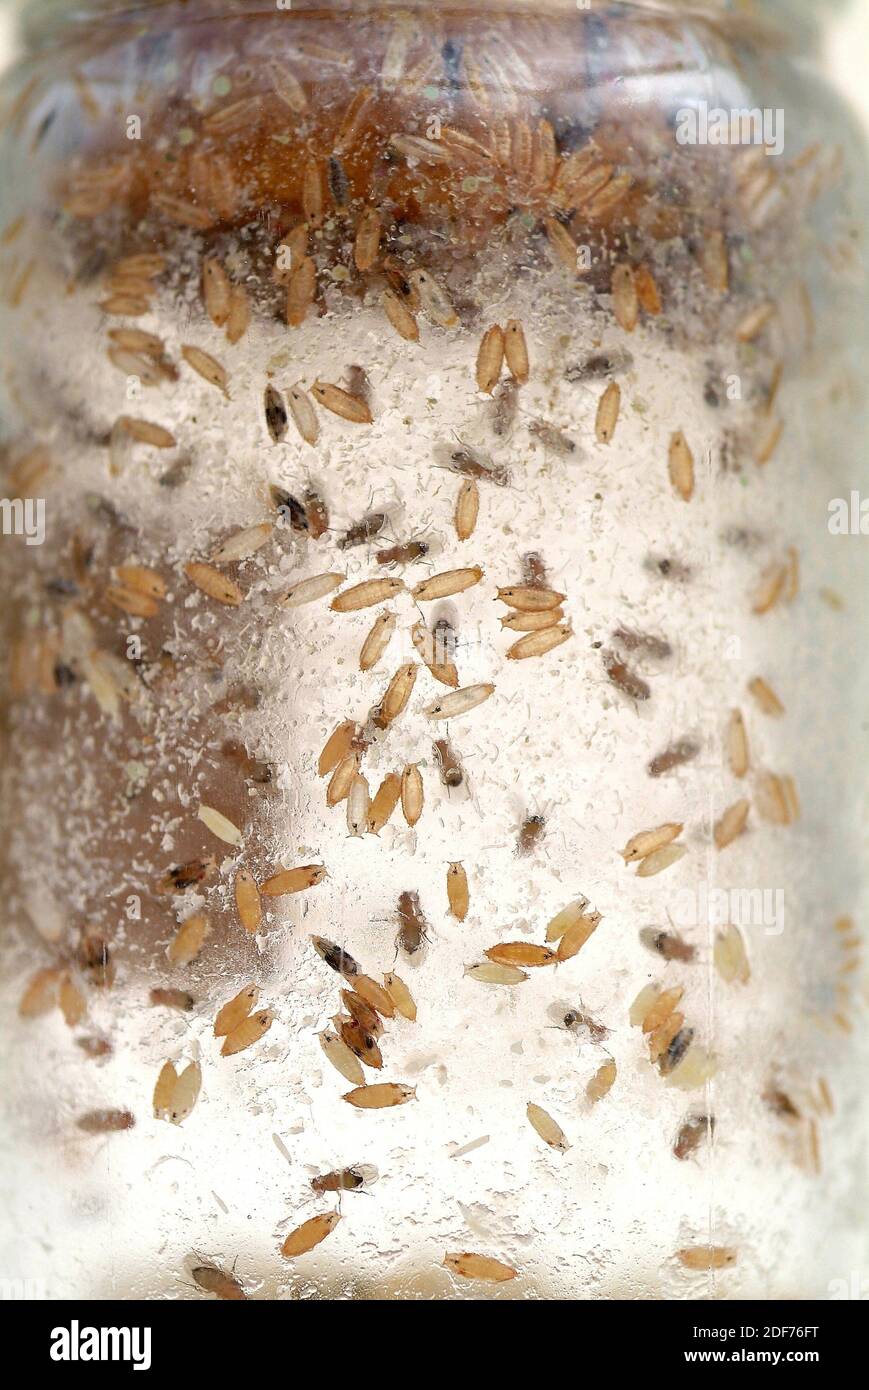 Vinegar fly or common fruit fly (Drosophila melanogaster), adults and larvae in a breeding flasck for genetic research. Stock Photo